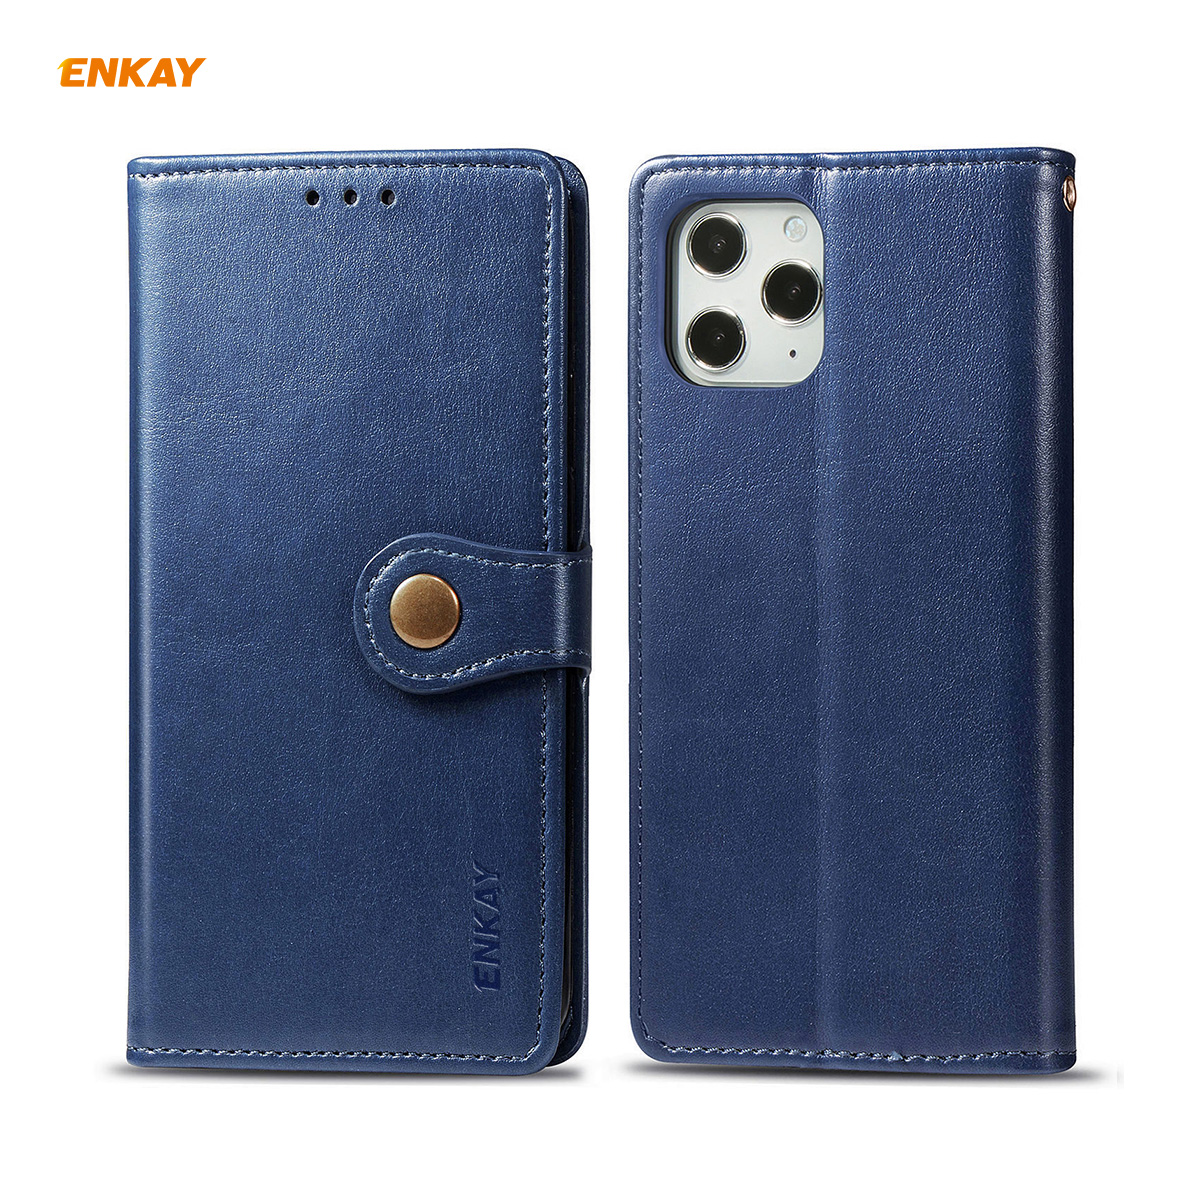 Enkay-for-iPhone-12-Pro-Max-Case-Retro-Litchi-Pattern-Flip-with-Mutiple-Card-Slots-Wallet-Stand-PU-L-1755116-2